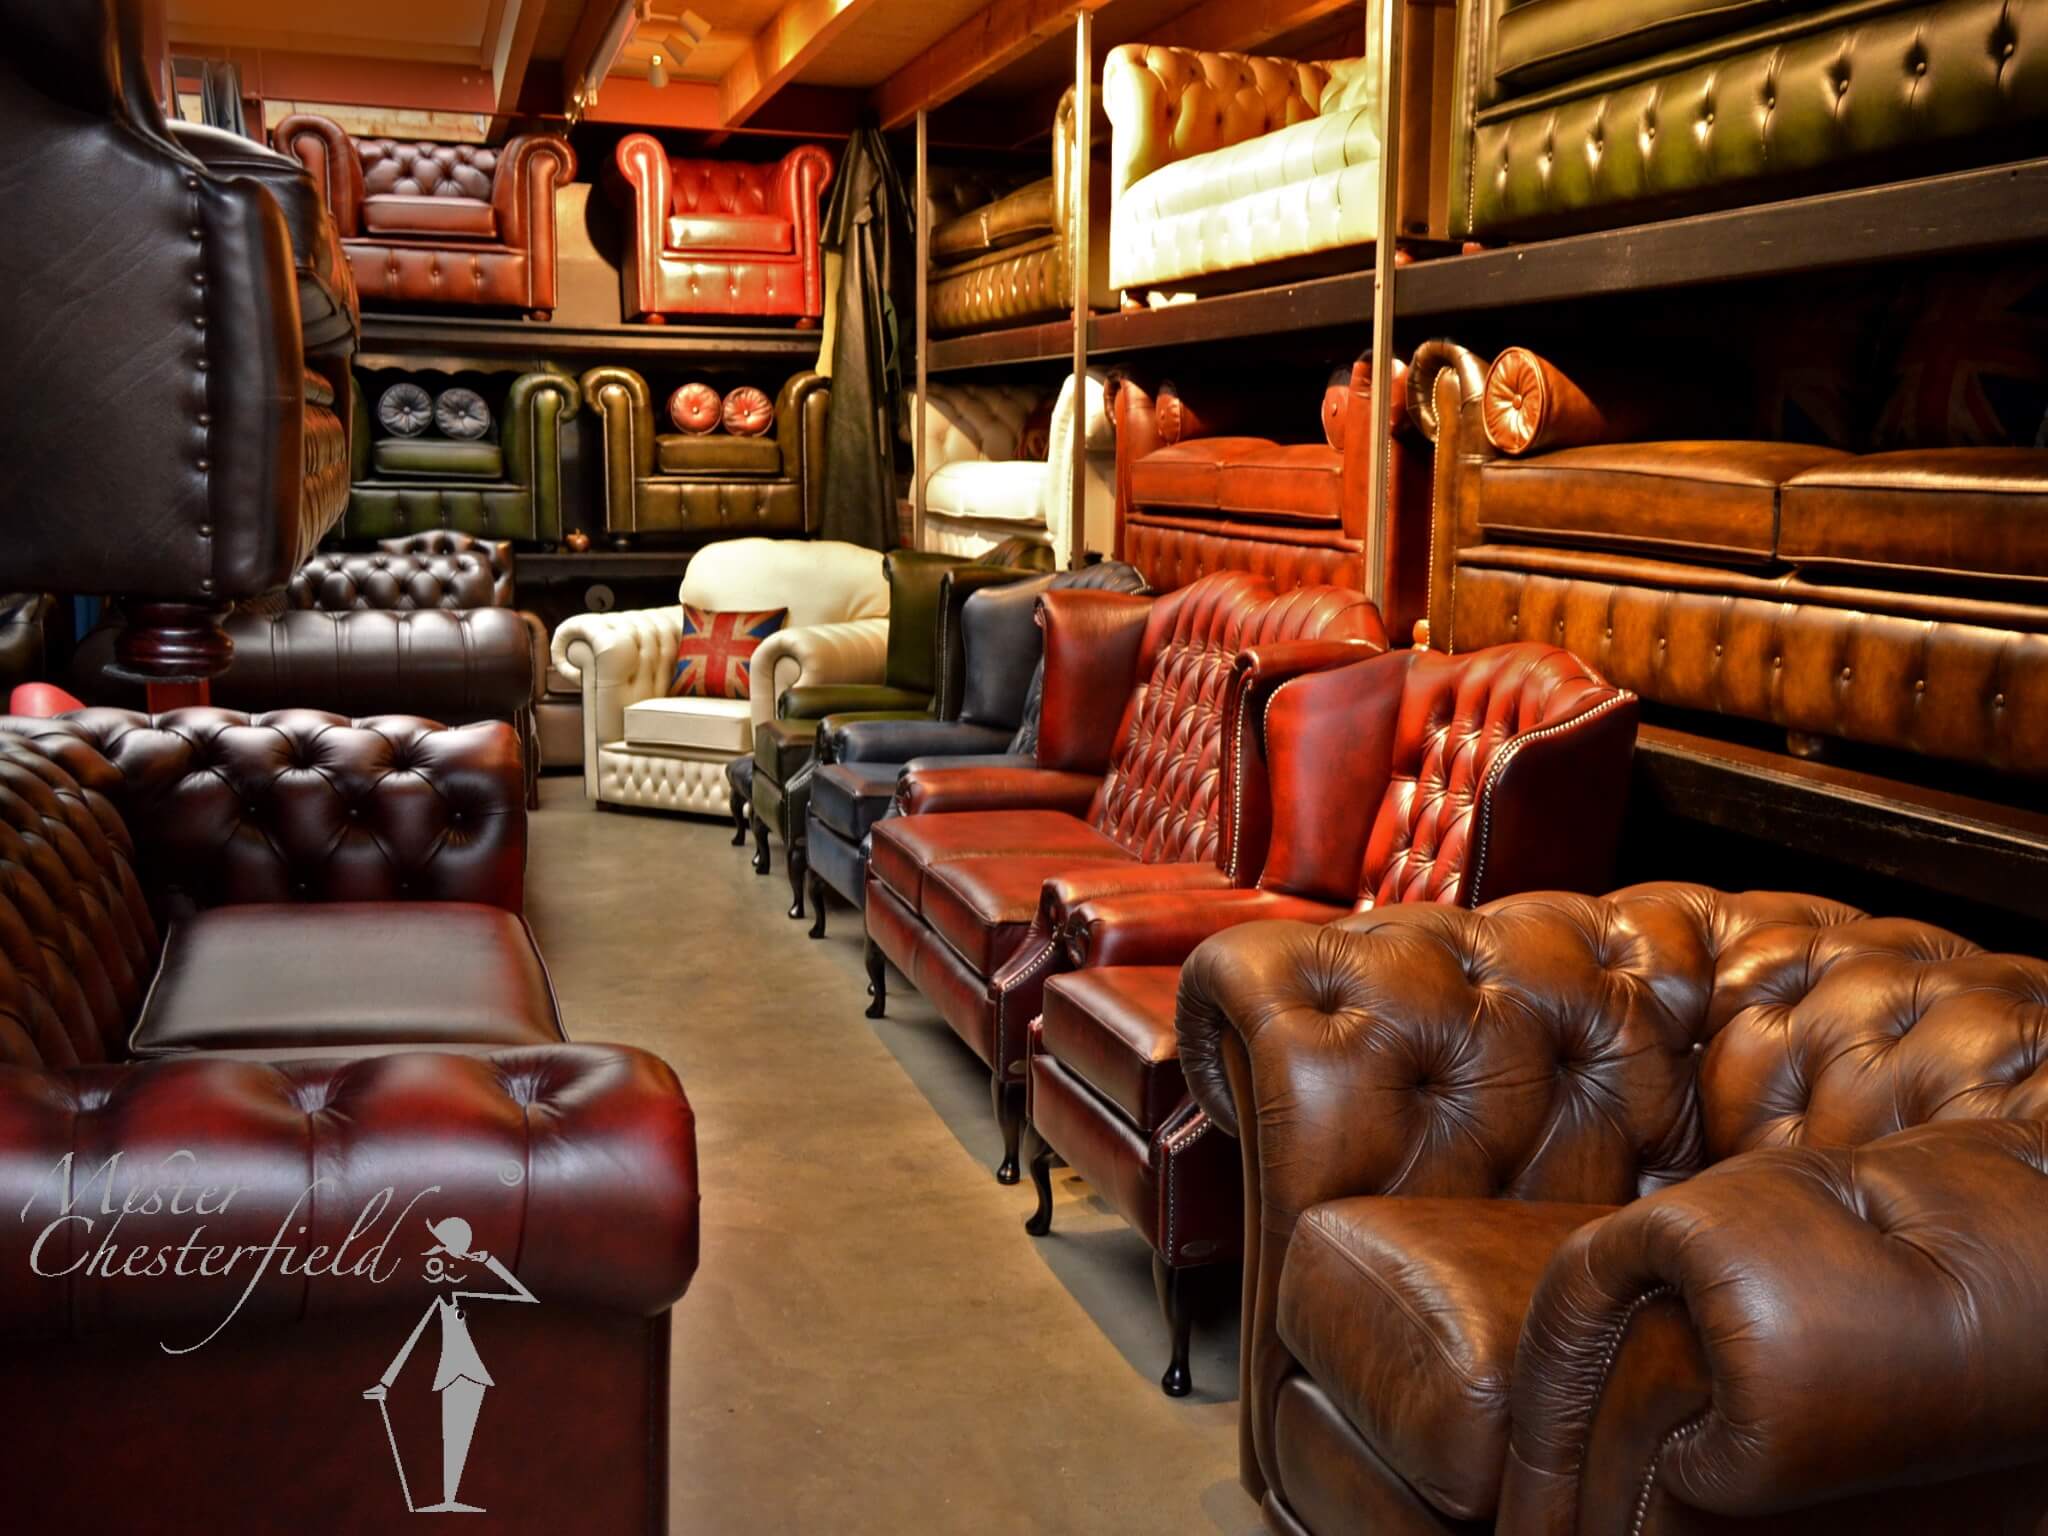 outlet-showroom-models-original-english-chesterfield-sherwood-stock-instant-available-sofa-armchairs-chairs